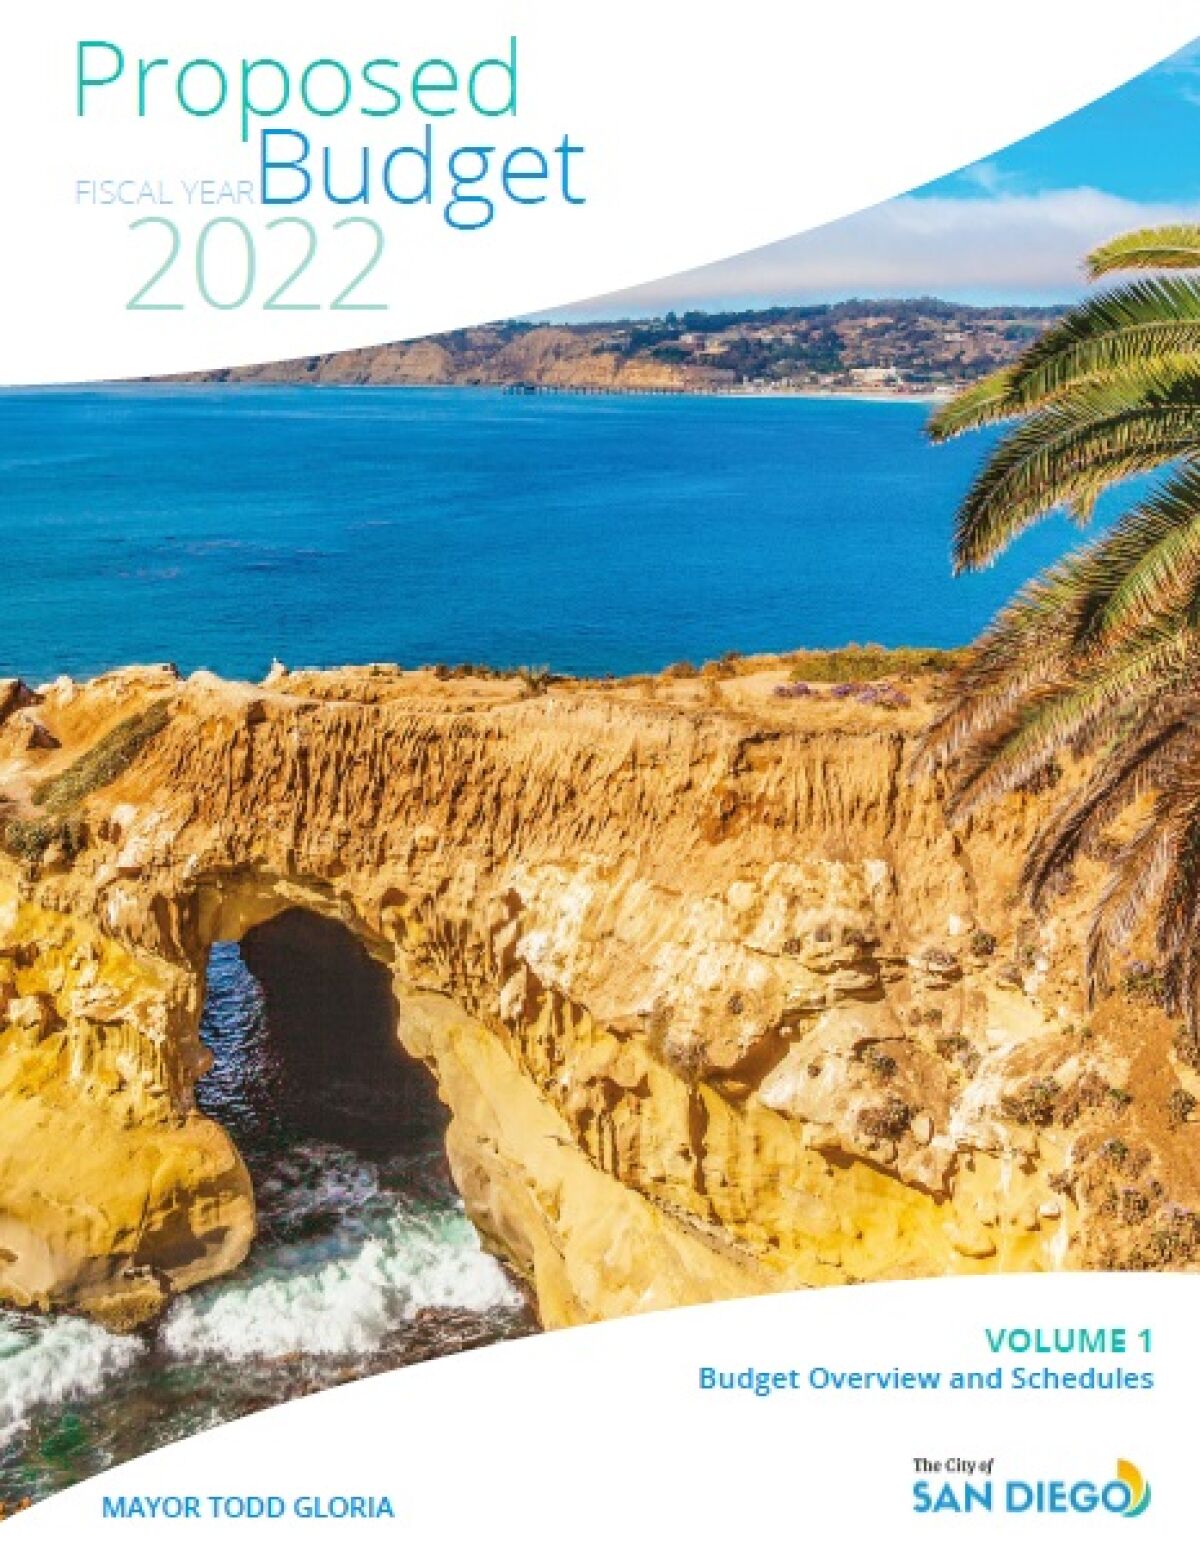 The cover of San Diego Mayor Todd Gloria's proposed budget for fiscal 2022 features a photo of Goldfish Point in La Jolla.